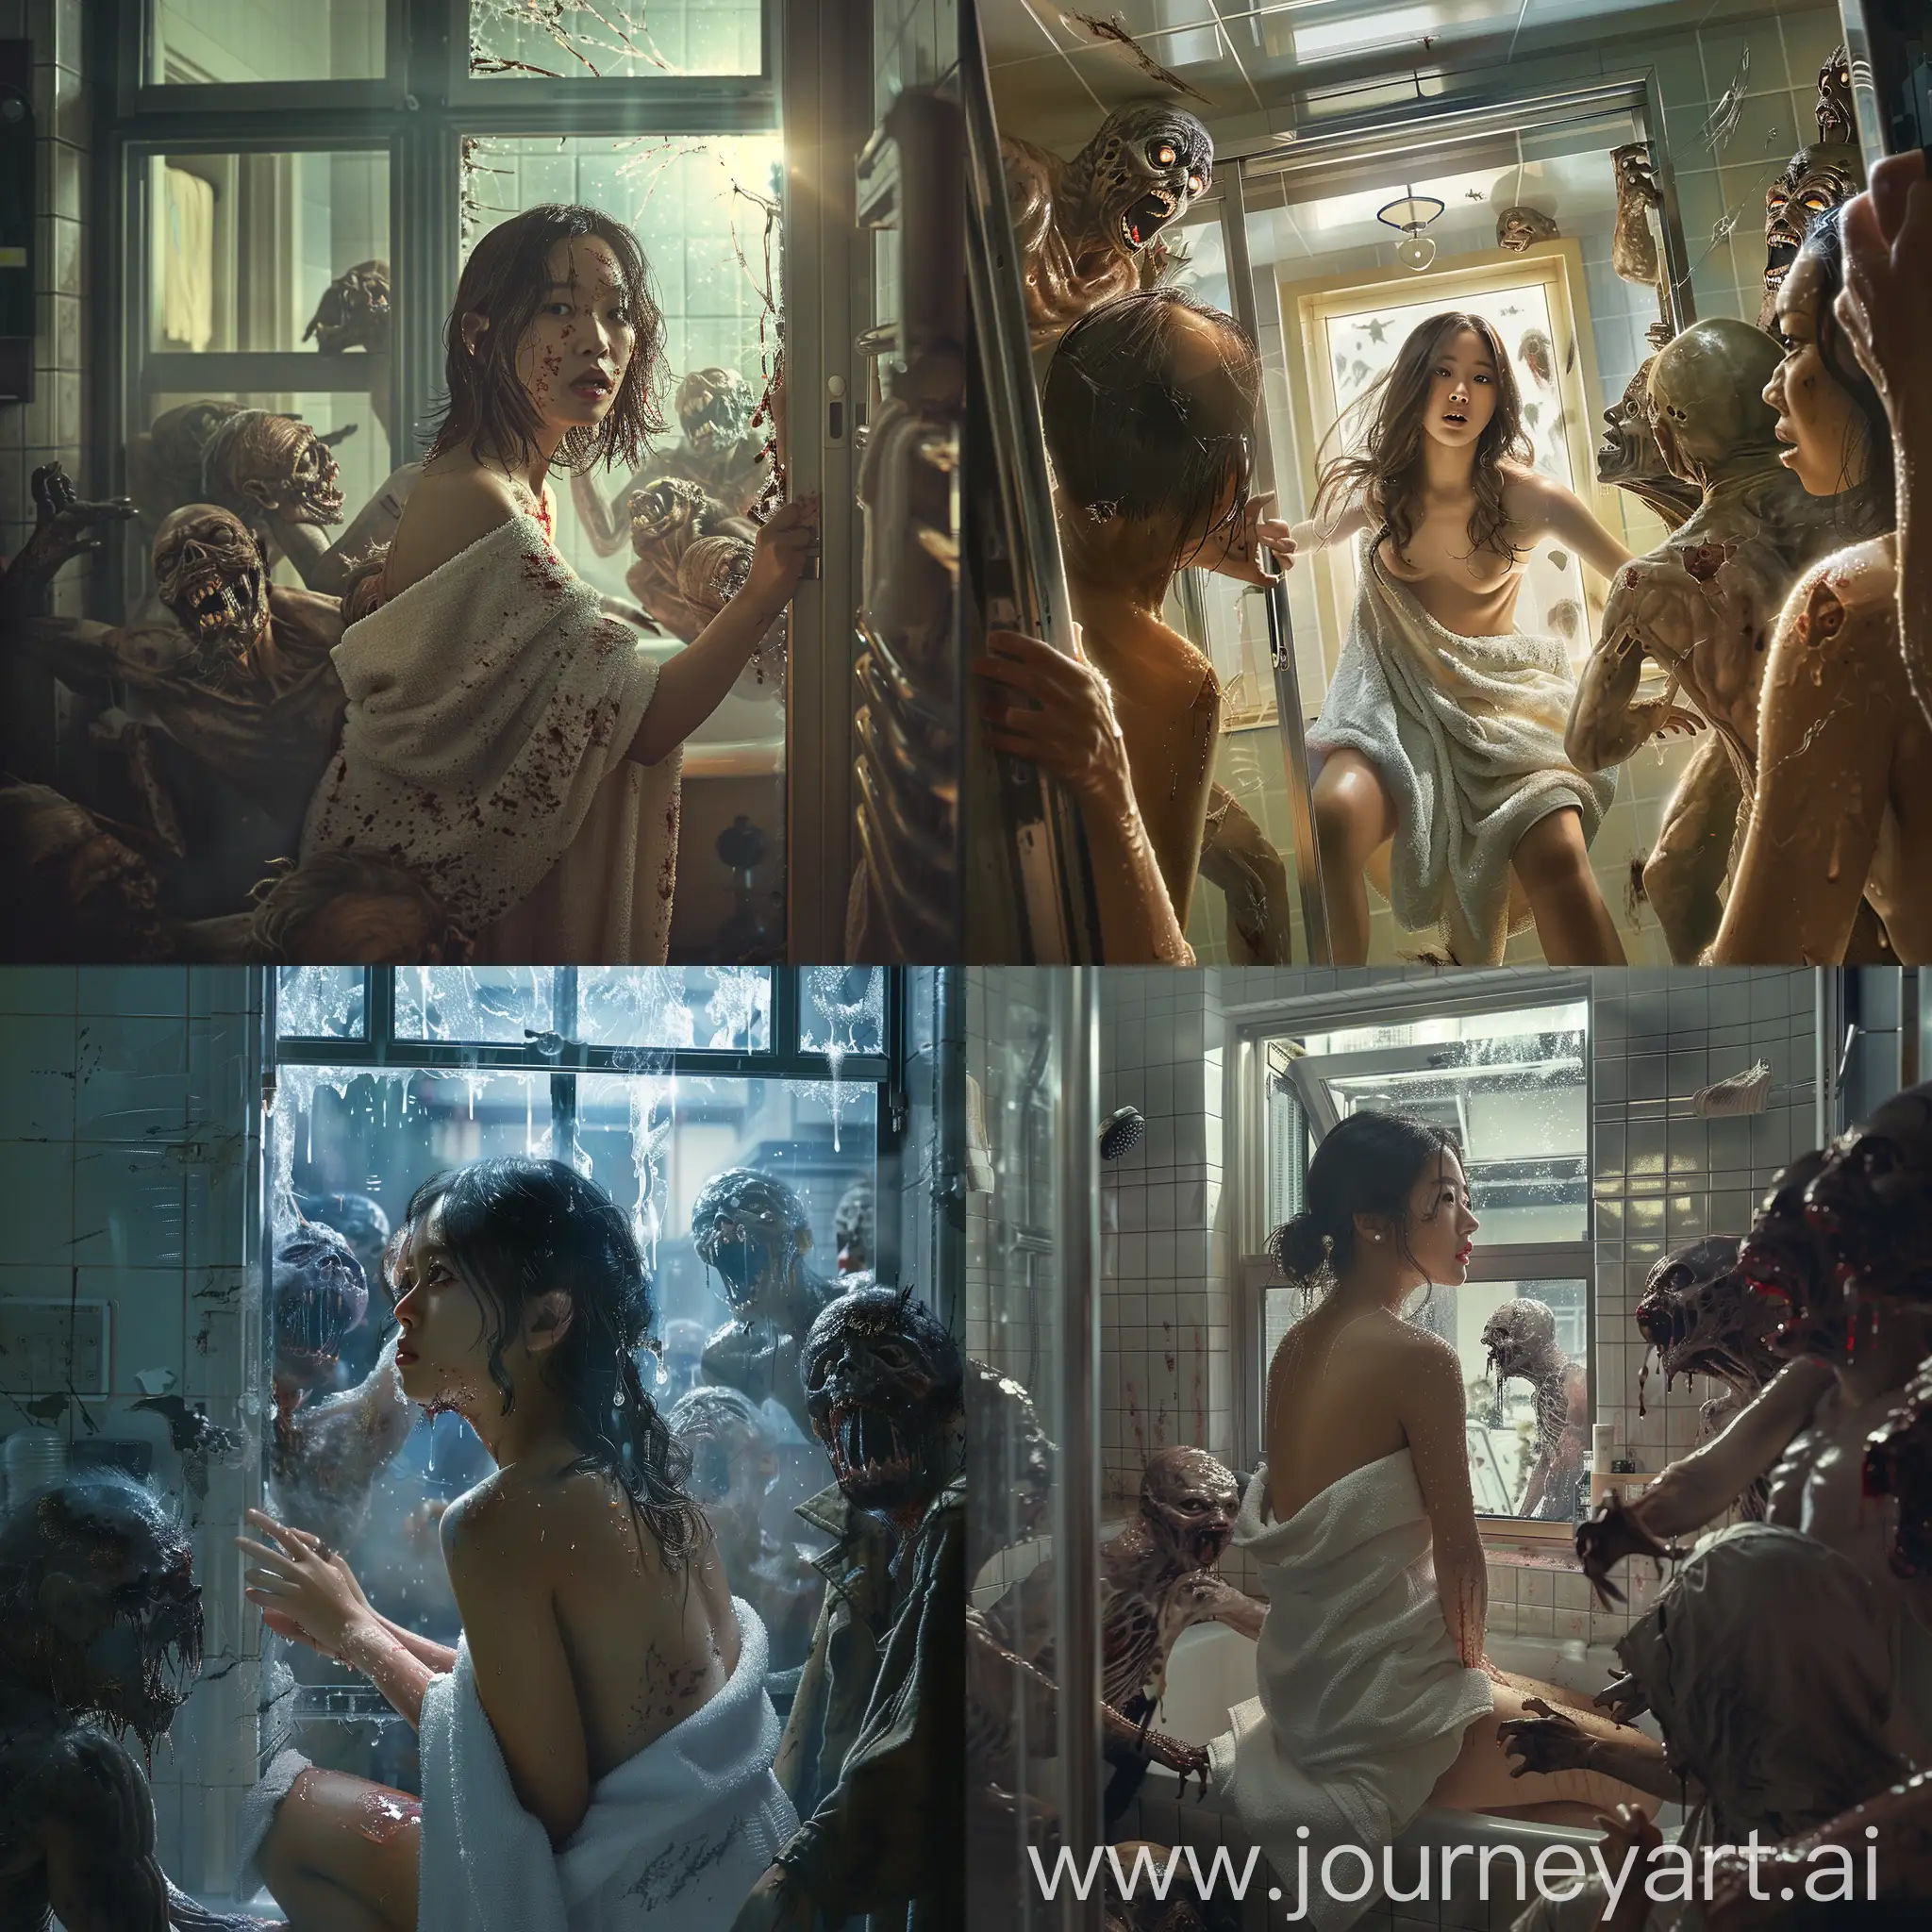 In a modern bathroom, a beautiful young Korean woman clad in a towel finds herself surrounded by vile ghouls, who broke through the window.